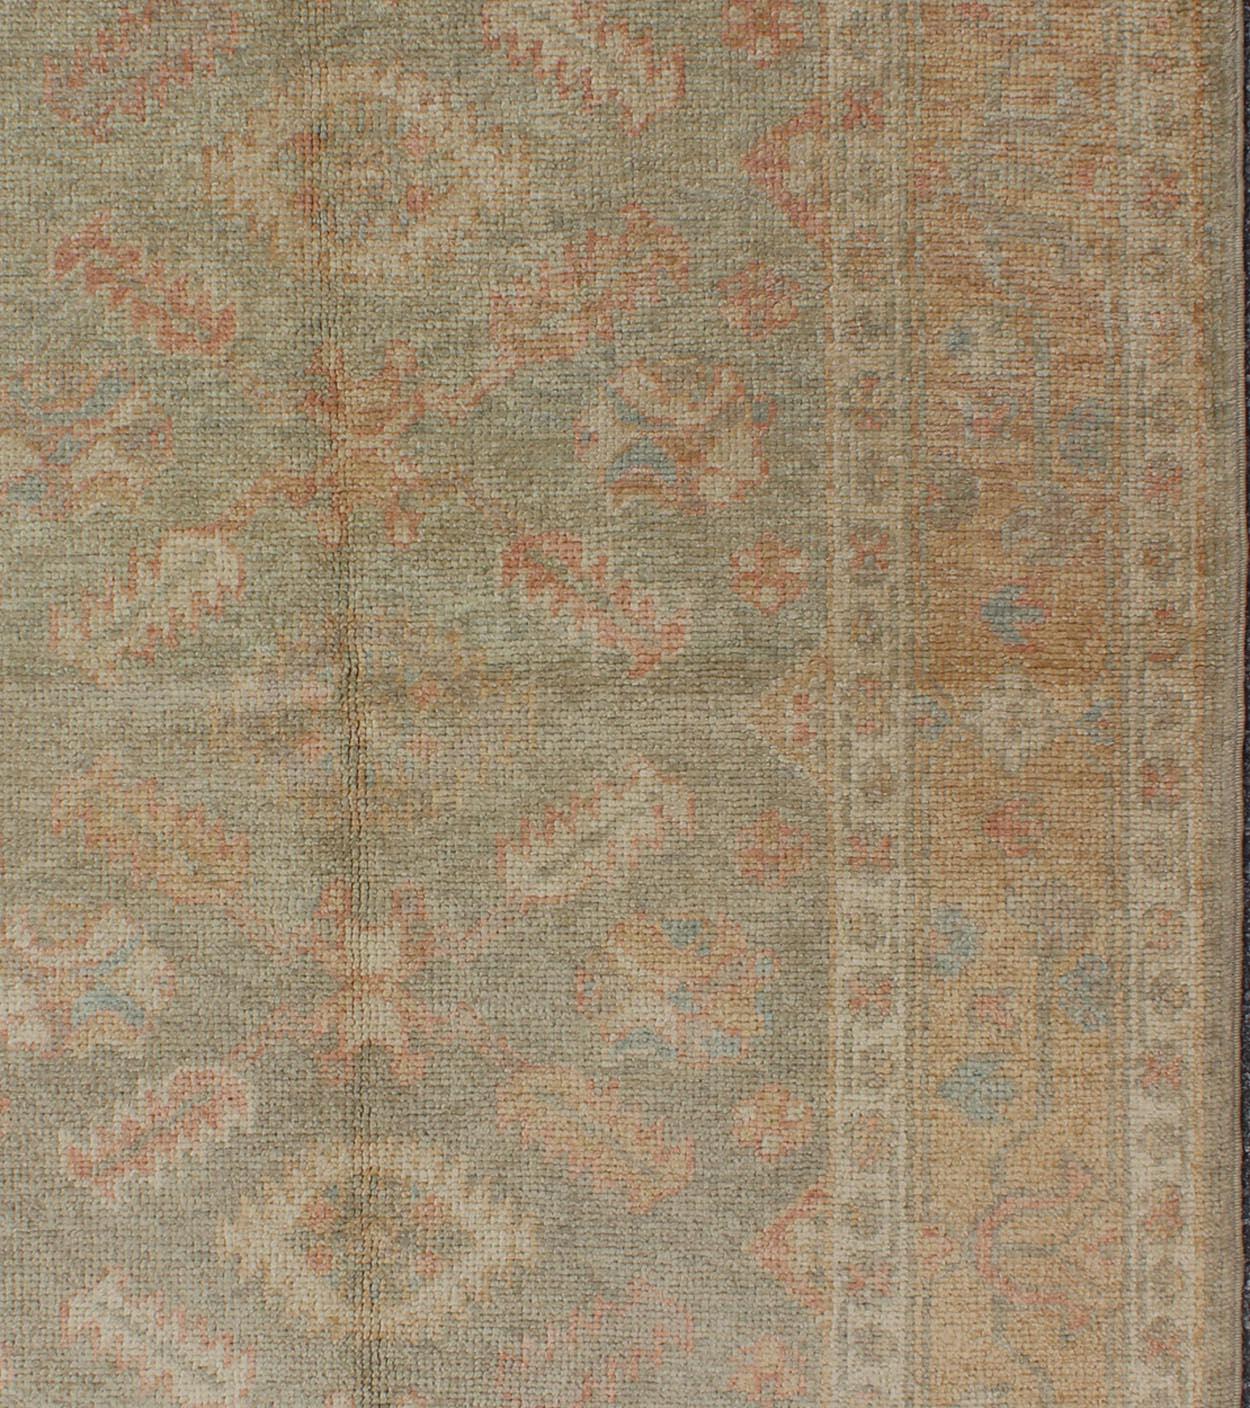 Floral reproduction Oushak rug from Turkey, rug EN-345, country of origin / type: Turkey / Oushak, circa 2000

This reproduction Turkish Oushak rug features a garden-inspired design of various blossom motifs. The large, multi-banded border